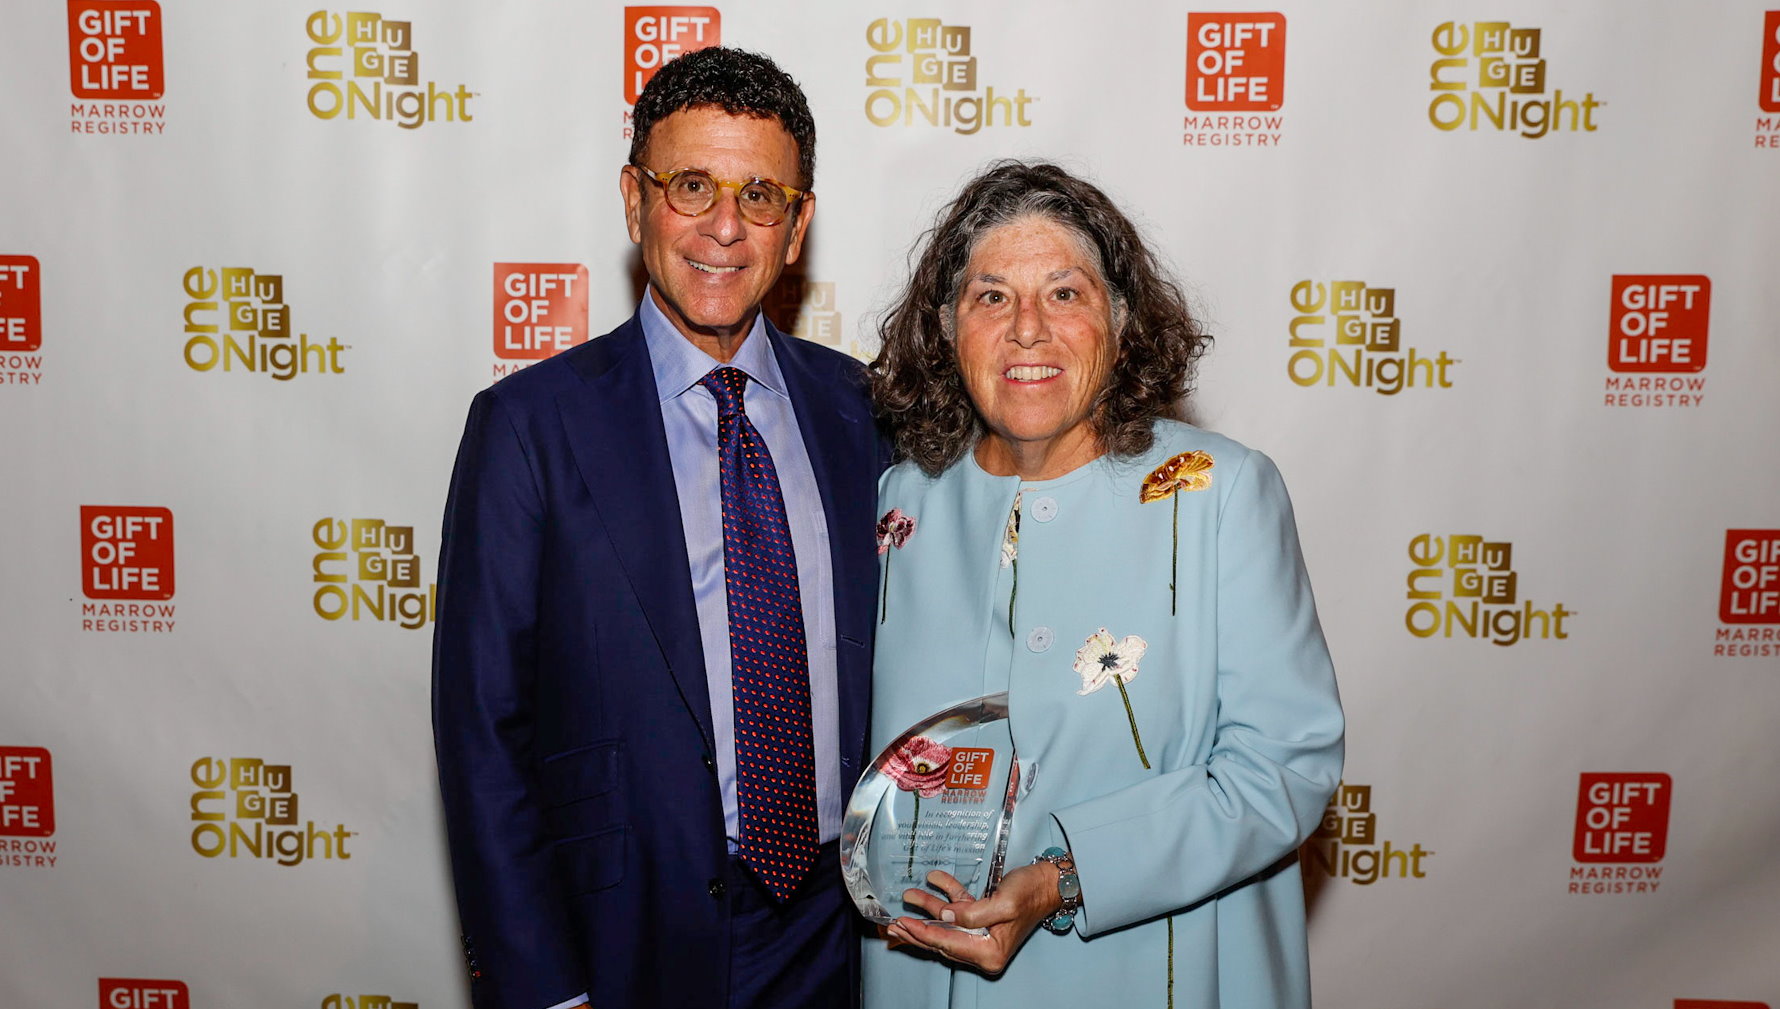 Gift of Life Marrow Registry presented the Partners for Life Award to Board of Directors member Mindy Schneider and her husband Dr. Michael Lesser in recognition of their involvement with Gift of Life's mission. 